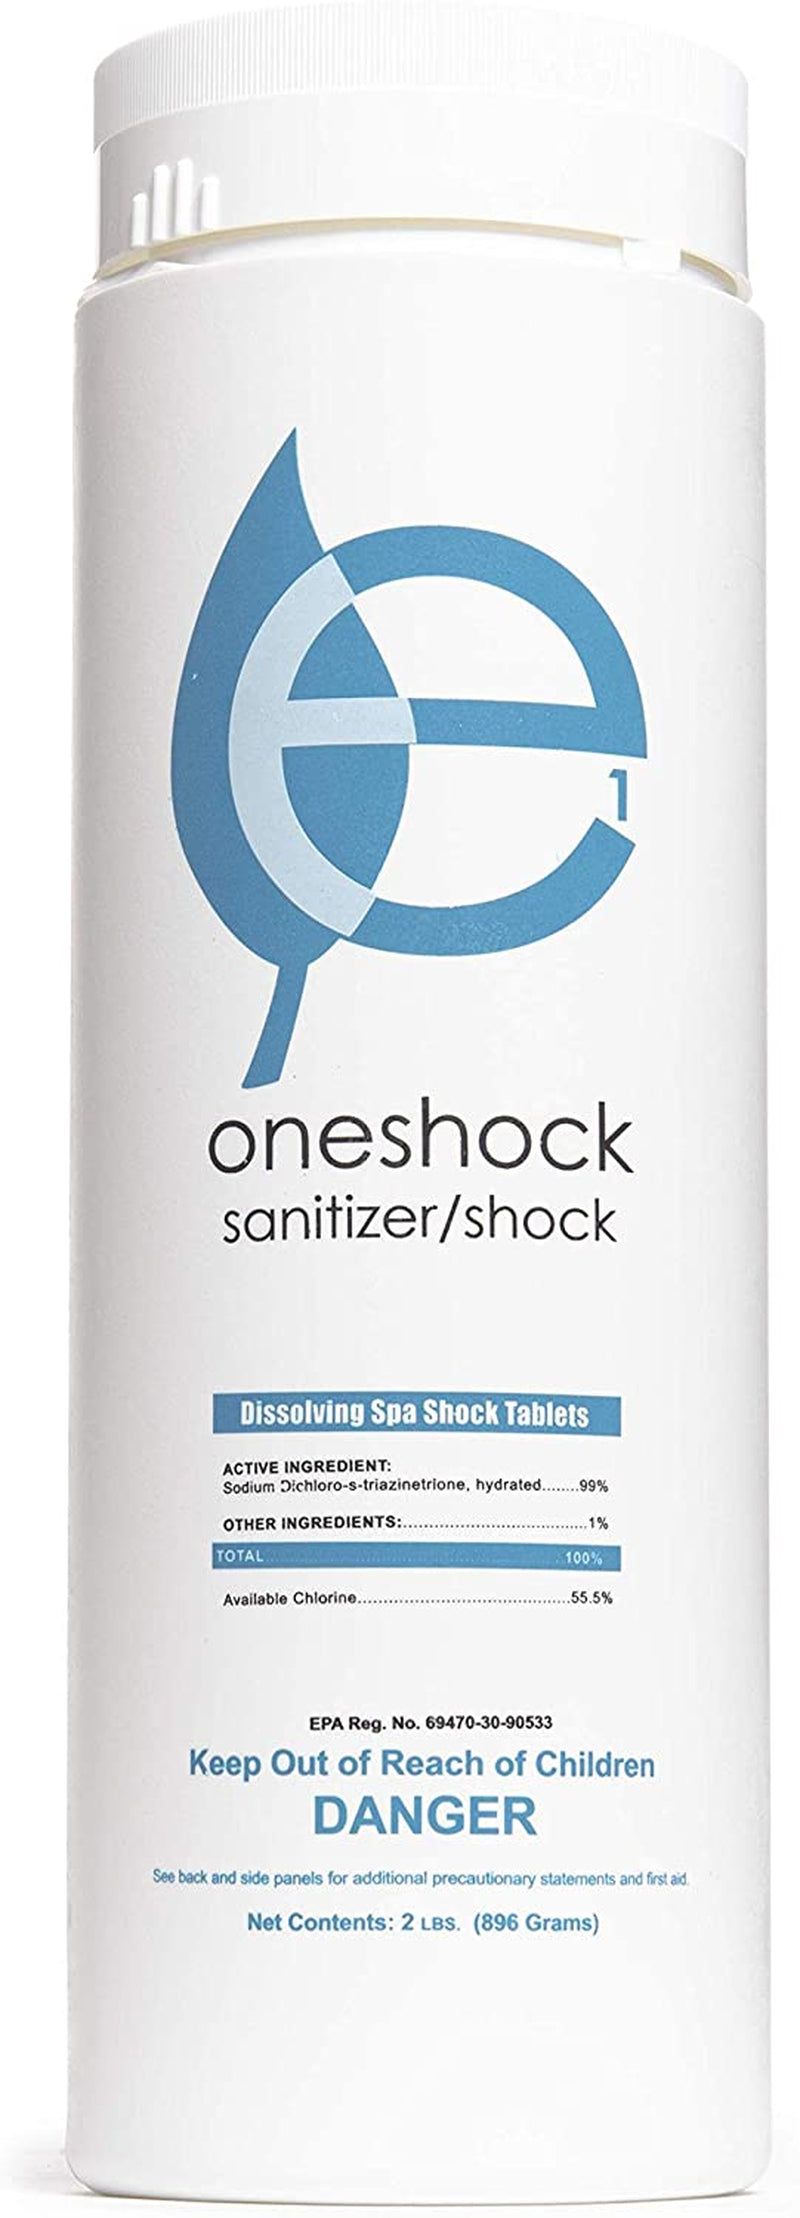 Ecoone | Oneshock Spa & Swimming Pool Tablets | Self-Dissolving, Pre-Measured Chlorine Shock & Sanitizer Combo | Clean, Clear & Bacteria Free Water | Swim-Safe Enzymes | Pool Maintenance | 64 Tabs